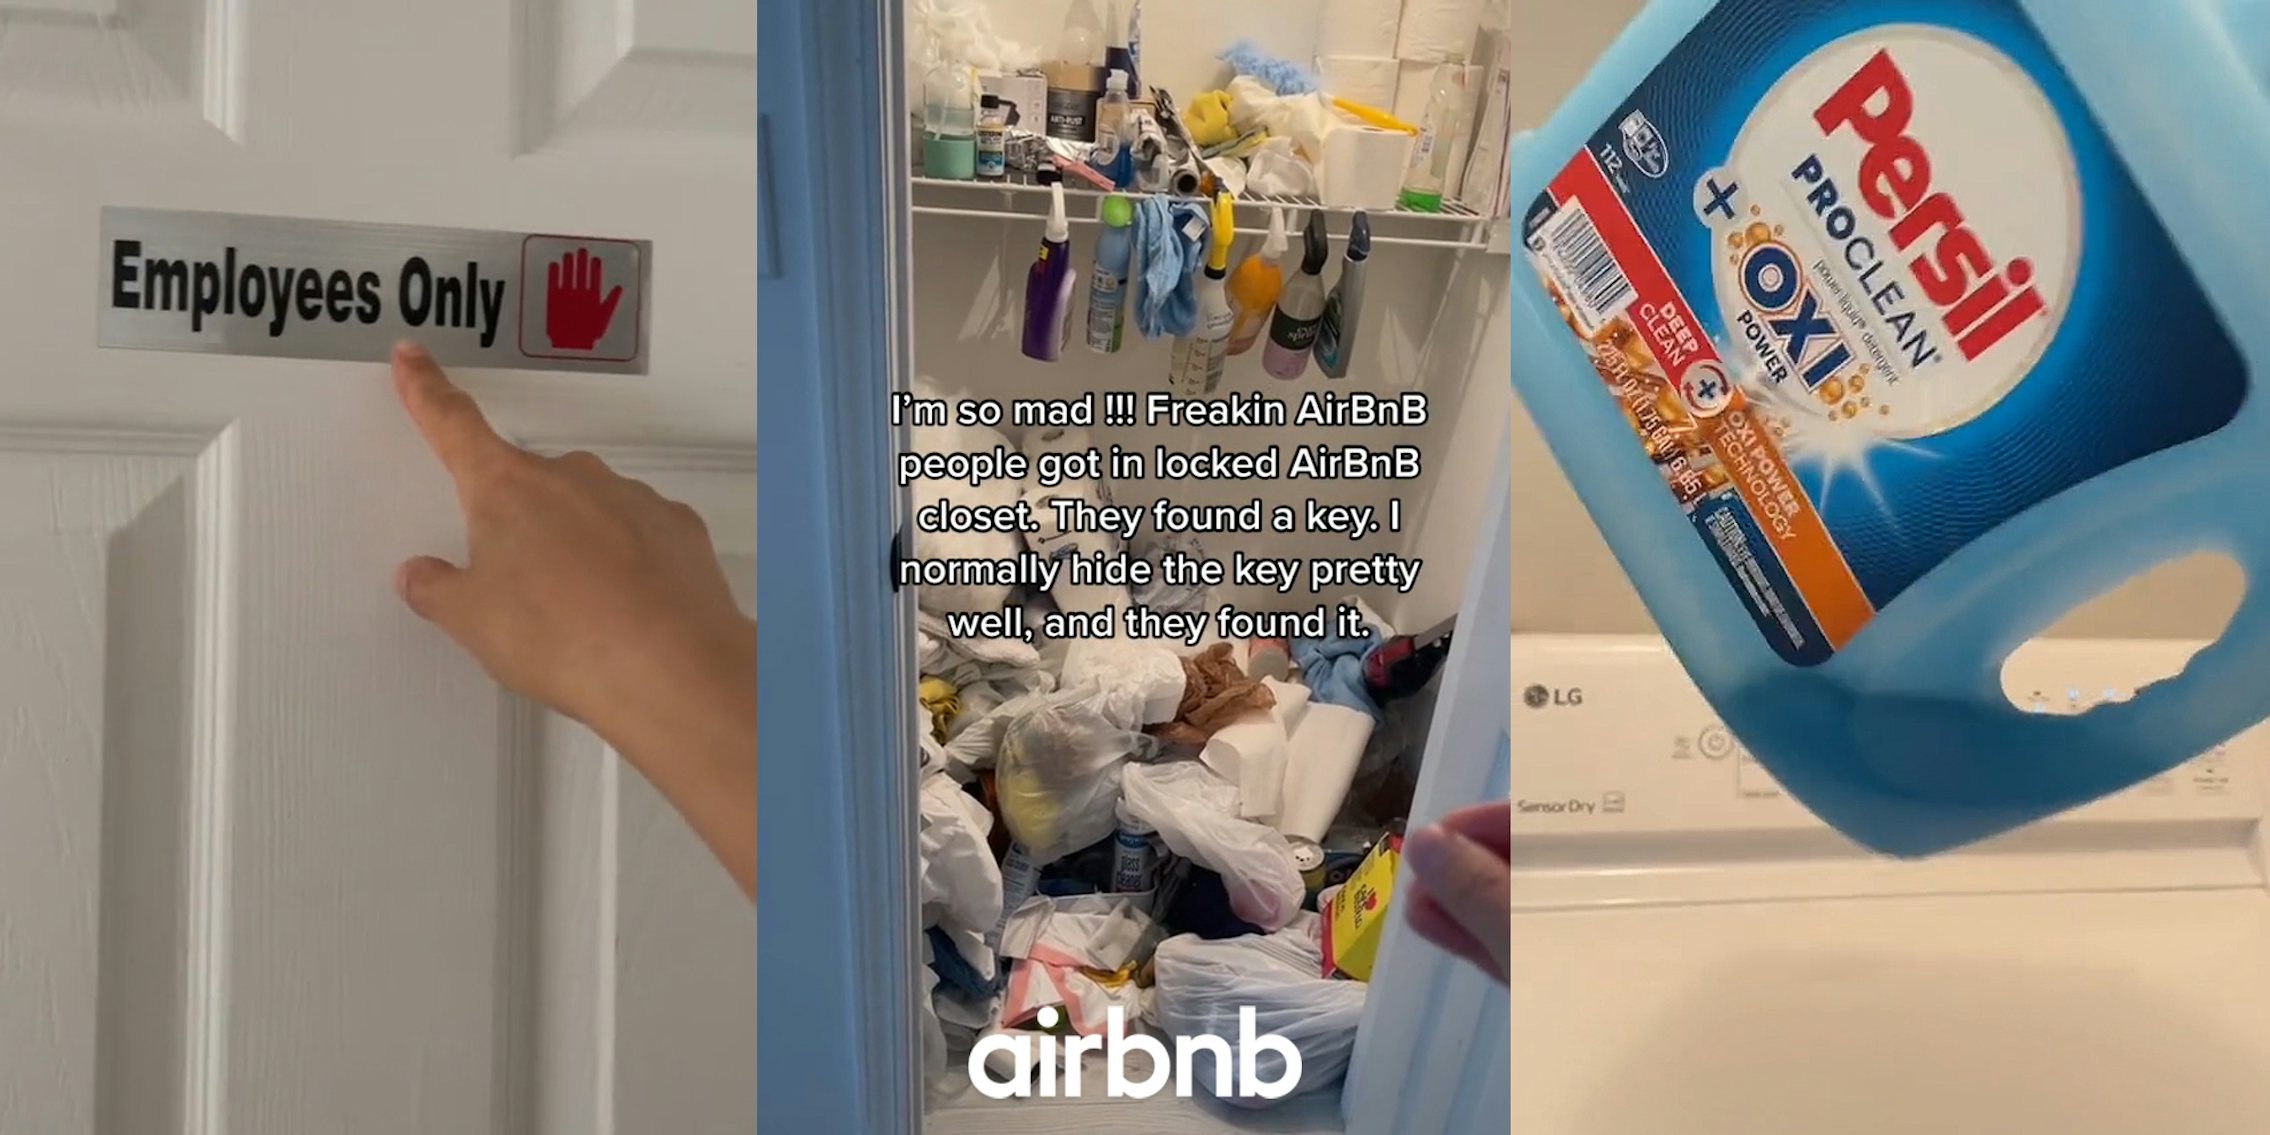 hand pointing to sign on door that reads 'Employees Only' (l) cleaning supplies unorganized in closet with Airbnb logo at bottom with caption 'I'm so mad!!! Freaking AirBnB people got in locked AirBnB closet. They found a key. I normally hide the key pretty well, and they found it.' (c) Persil laundry soap with very little inside container over washing machine (r)